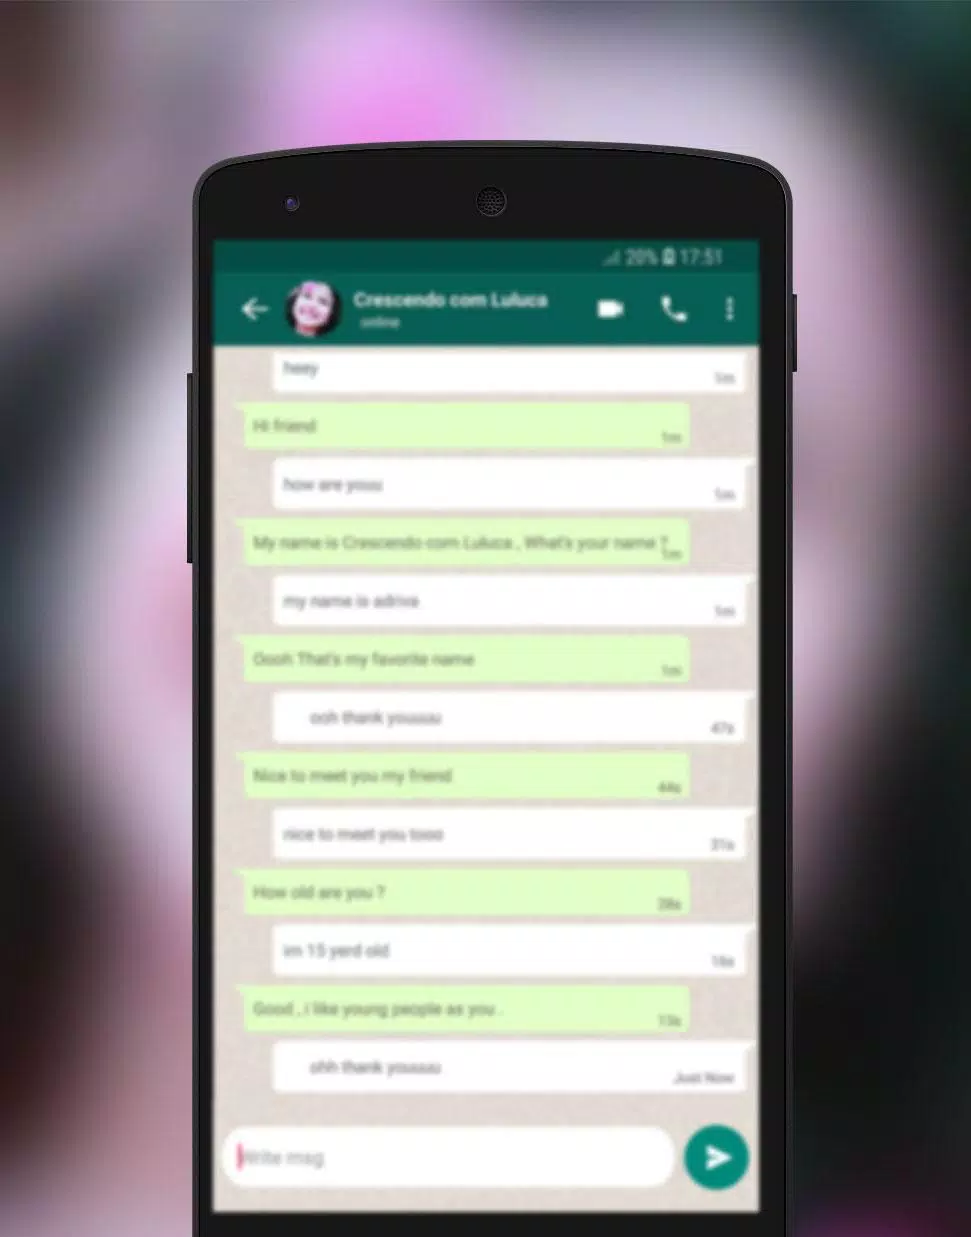 Chat With Crescendo com Luluca - Prank APK voor Android Download